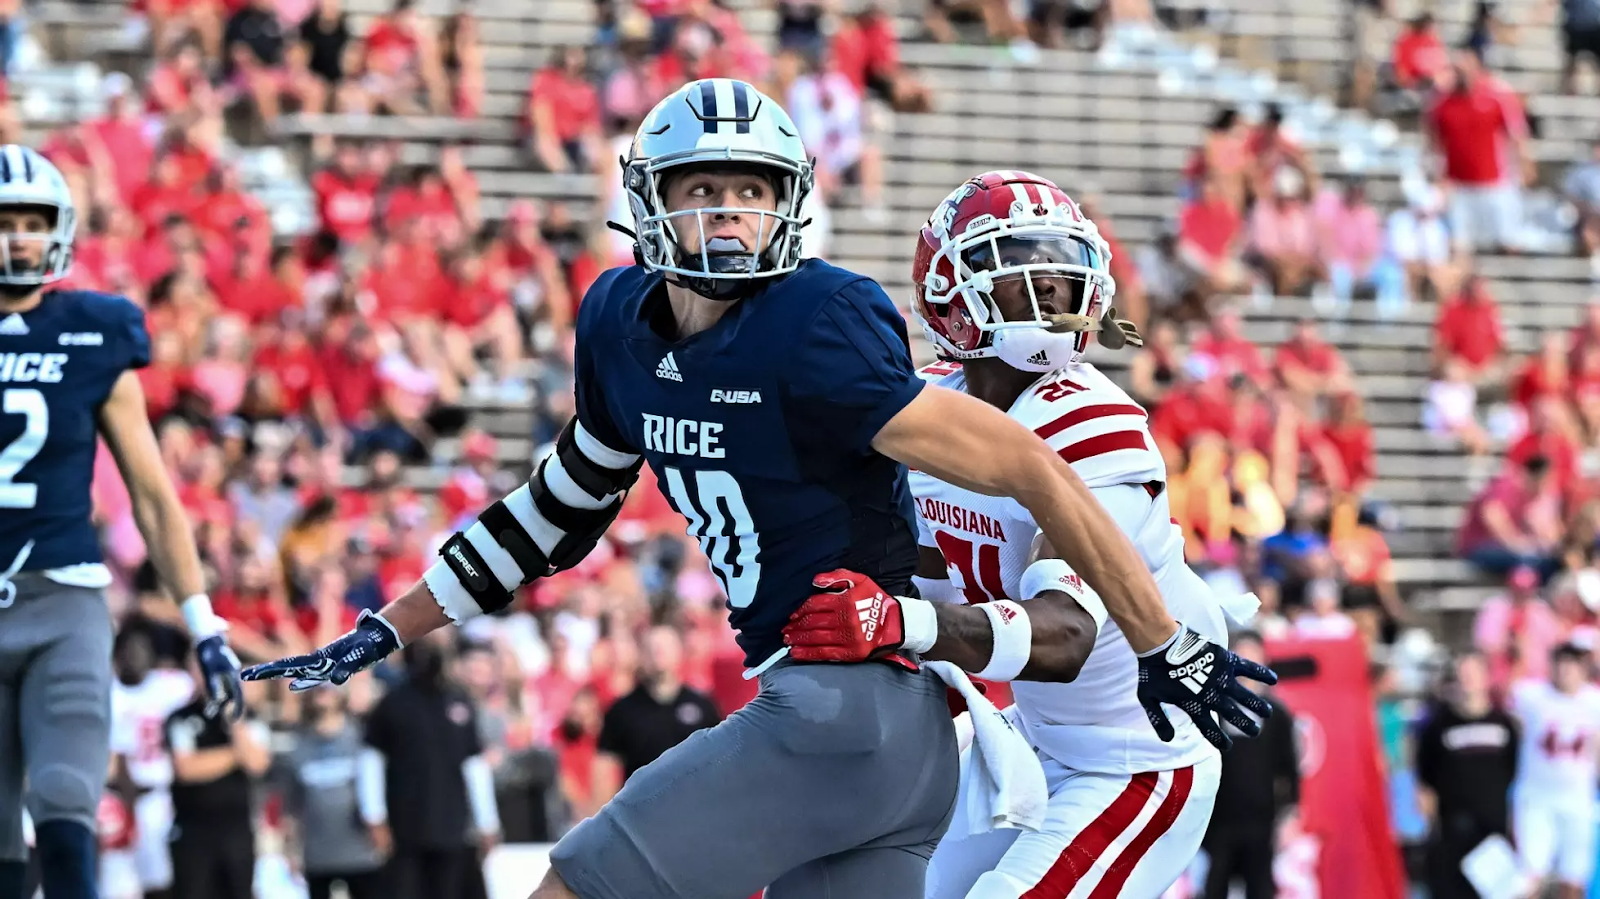 Luke McCaffrey is a WR at Rice who converted from QB in 2022. He has the sheer athleticism and football IQ to raise scout's eyes as he continues to progress this season. Hula Bowl scout Brinson Bagley breaks down McCaffrey as an NFL Prospect in his report.